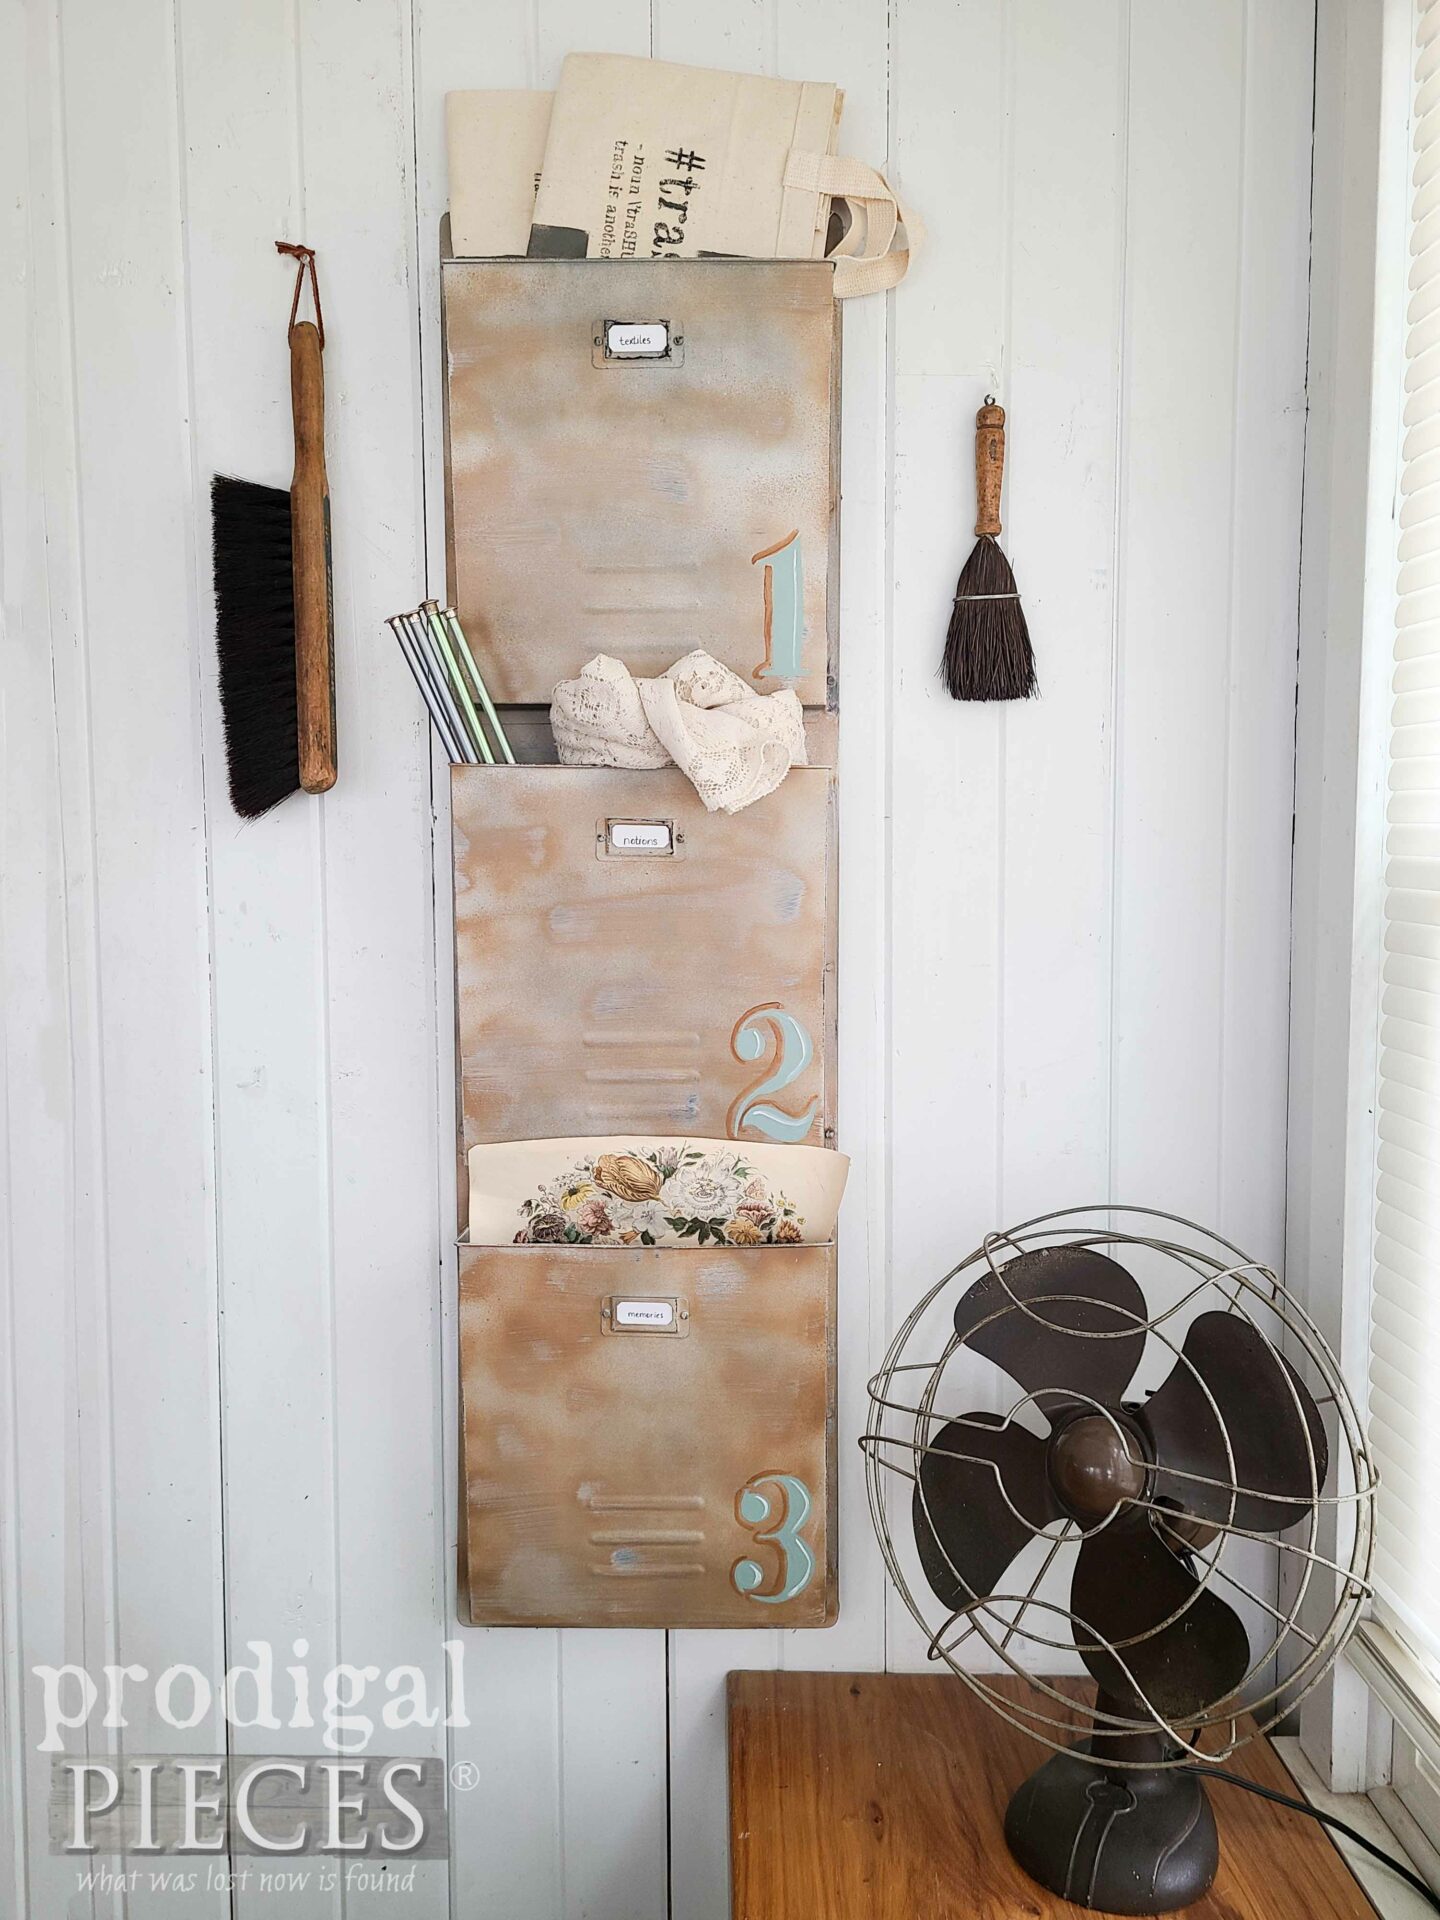 Farmhouse Style Vertical Wall File Organizer by Larissa of Prodigal Pieces | prodigalpieces.com #prodigalpieces #farmhouse #thrifted #upcycled